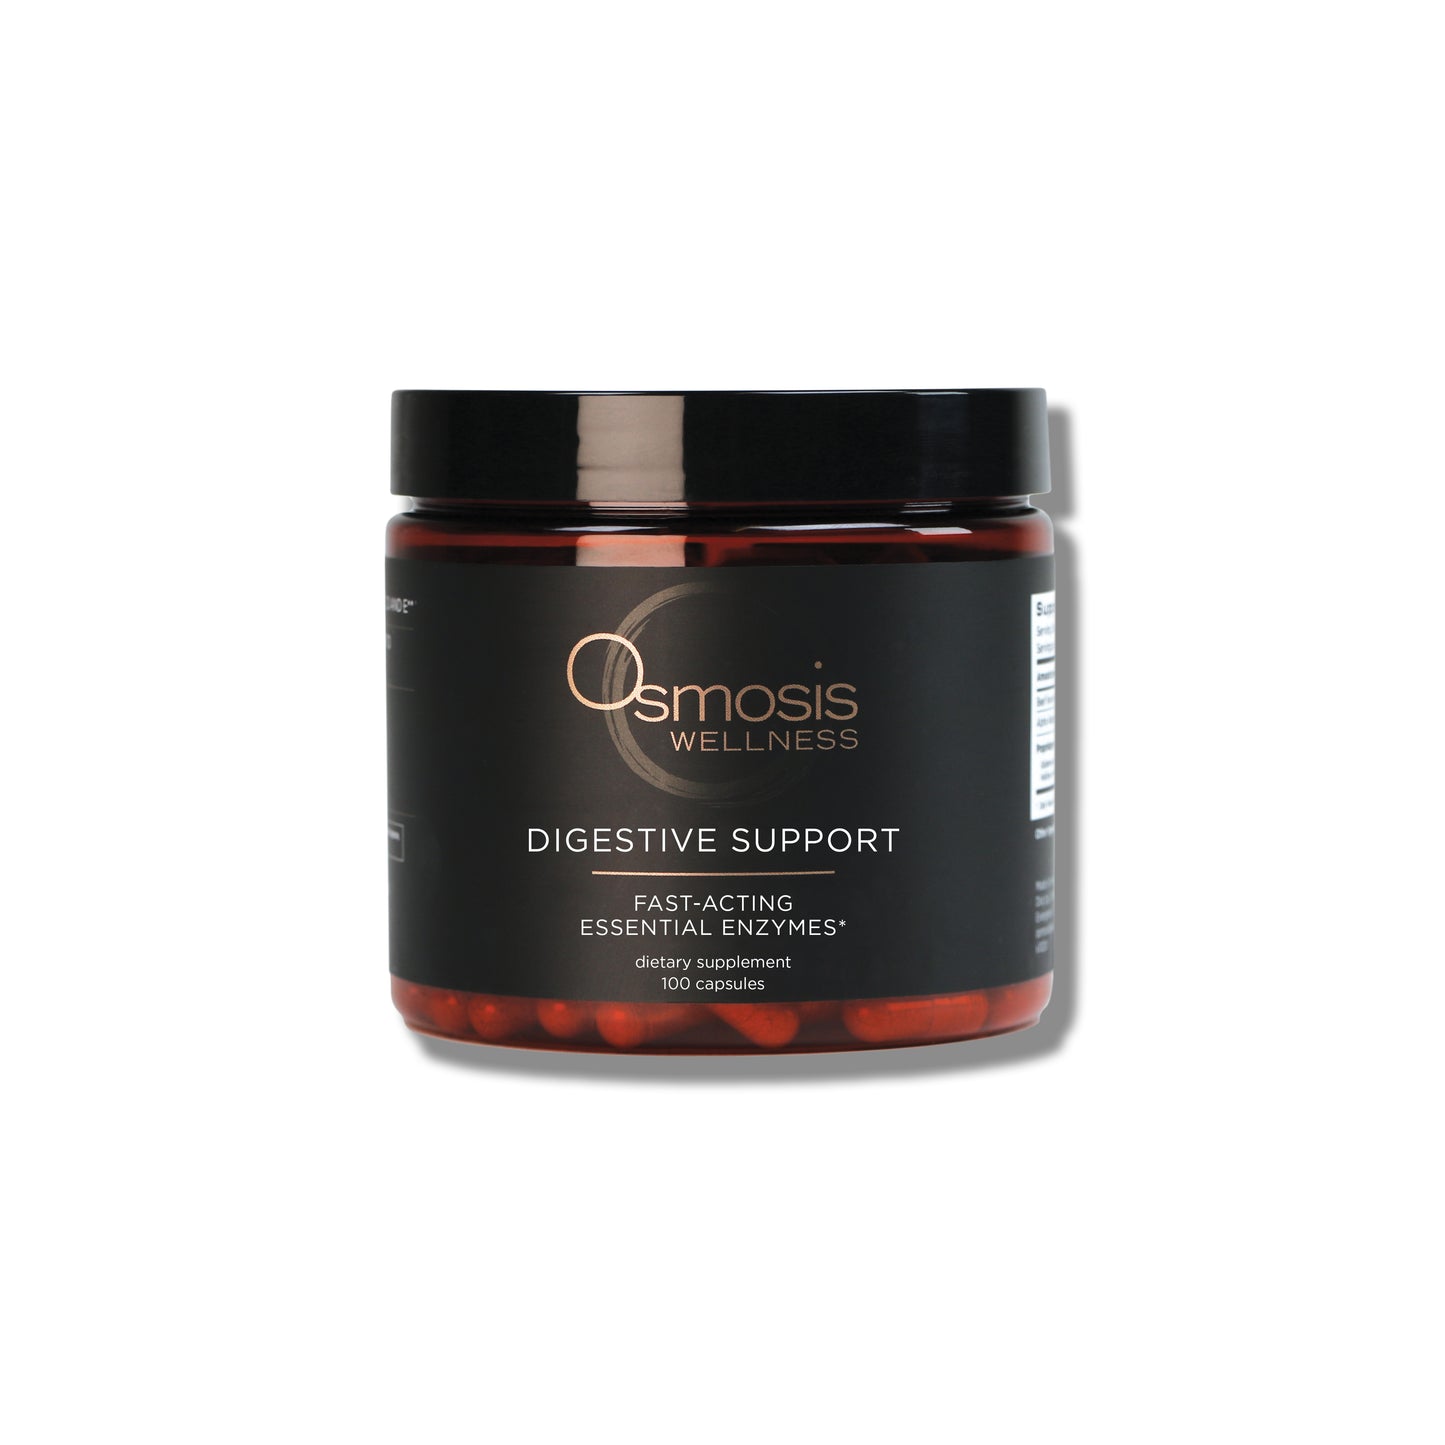 Osmosis+ Wellness Digestive Support (100 Capsules)